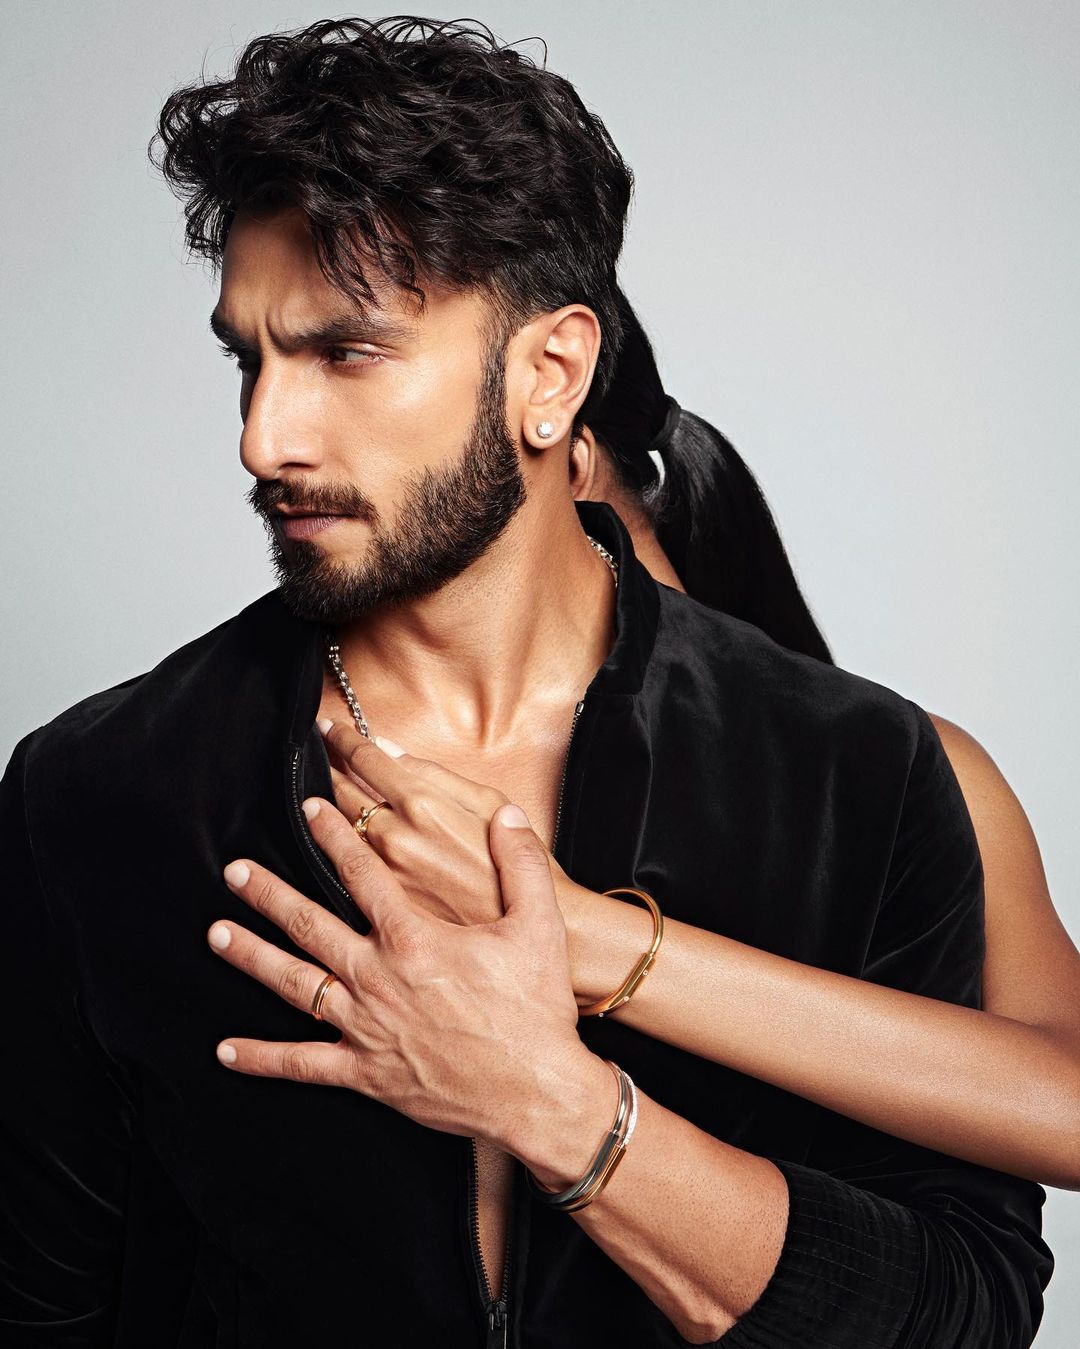 Ranveer Singh Replaces Shah Rukh Khan In Rajinikanth's Thalaivar 171?  Stepping Into SRK's Shoe For The 4th Time, Turning Into The Superstar's  Shadow One Blockbuster At A Time!